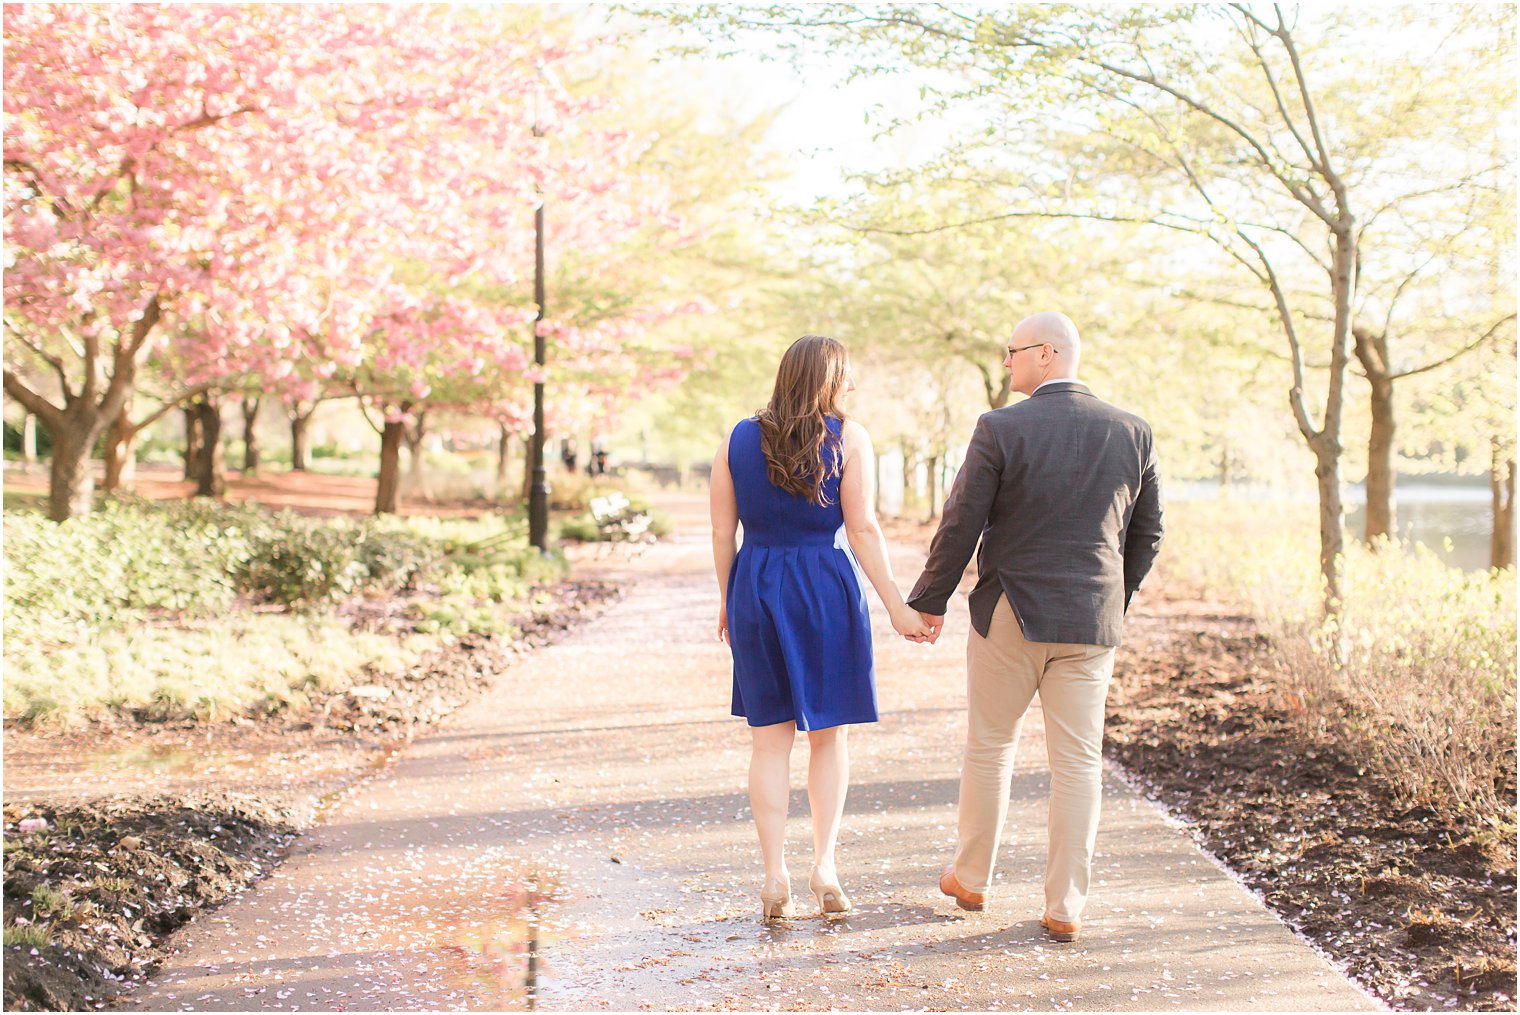 Couple walking away in a tree-lined path